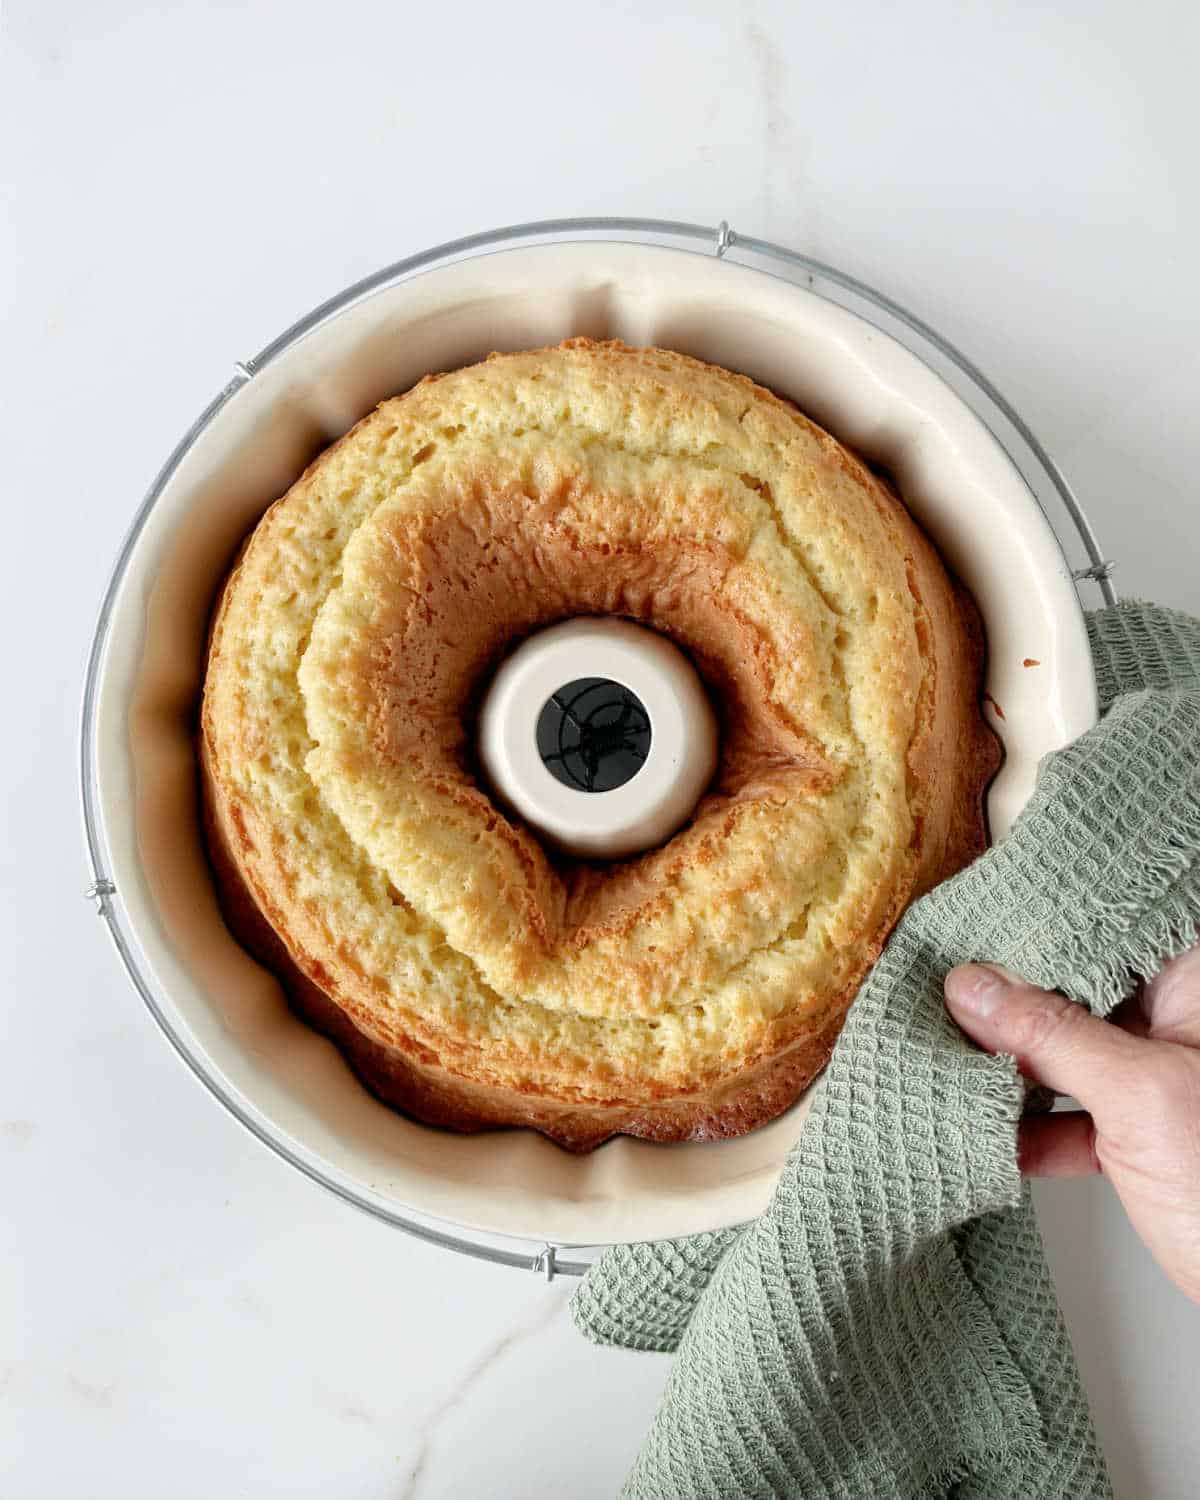 Hand holding baked cake in a bundt pan with a green towel. White surface. 